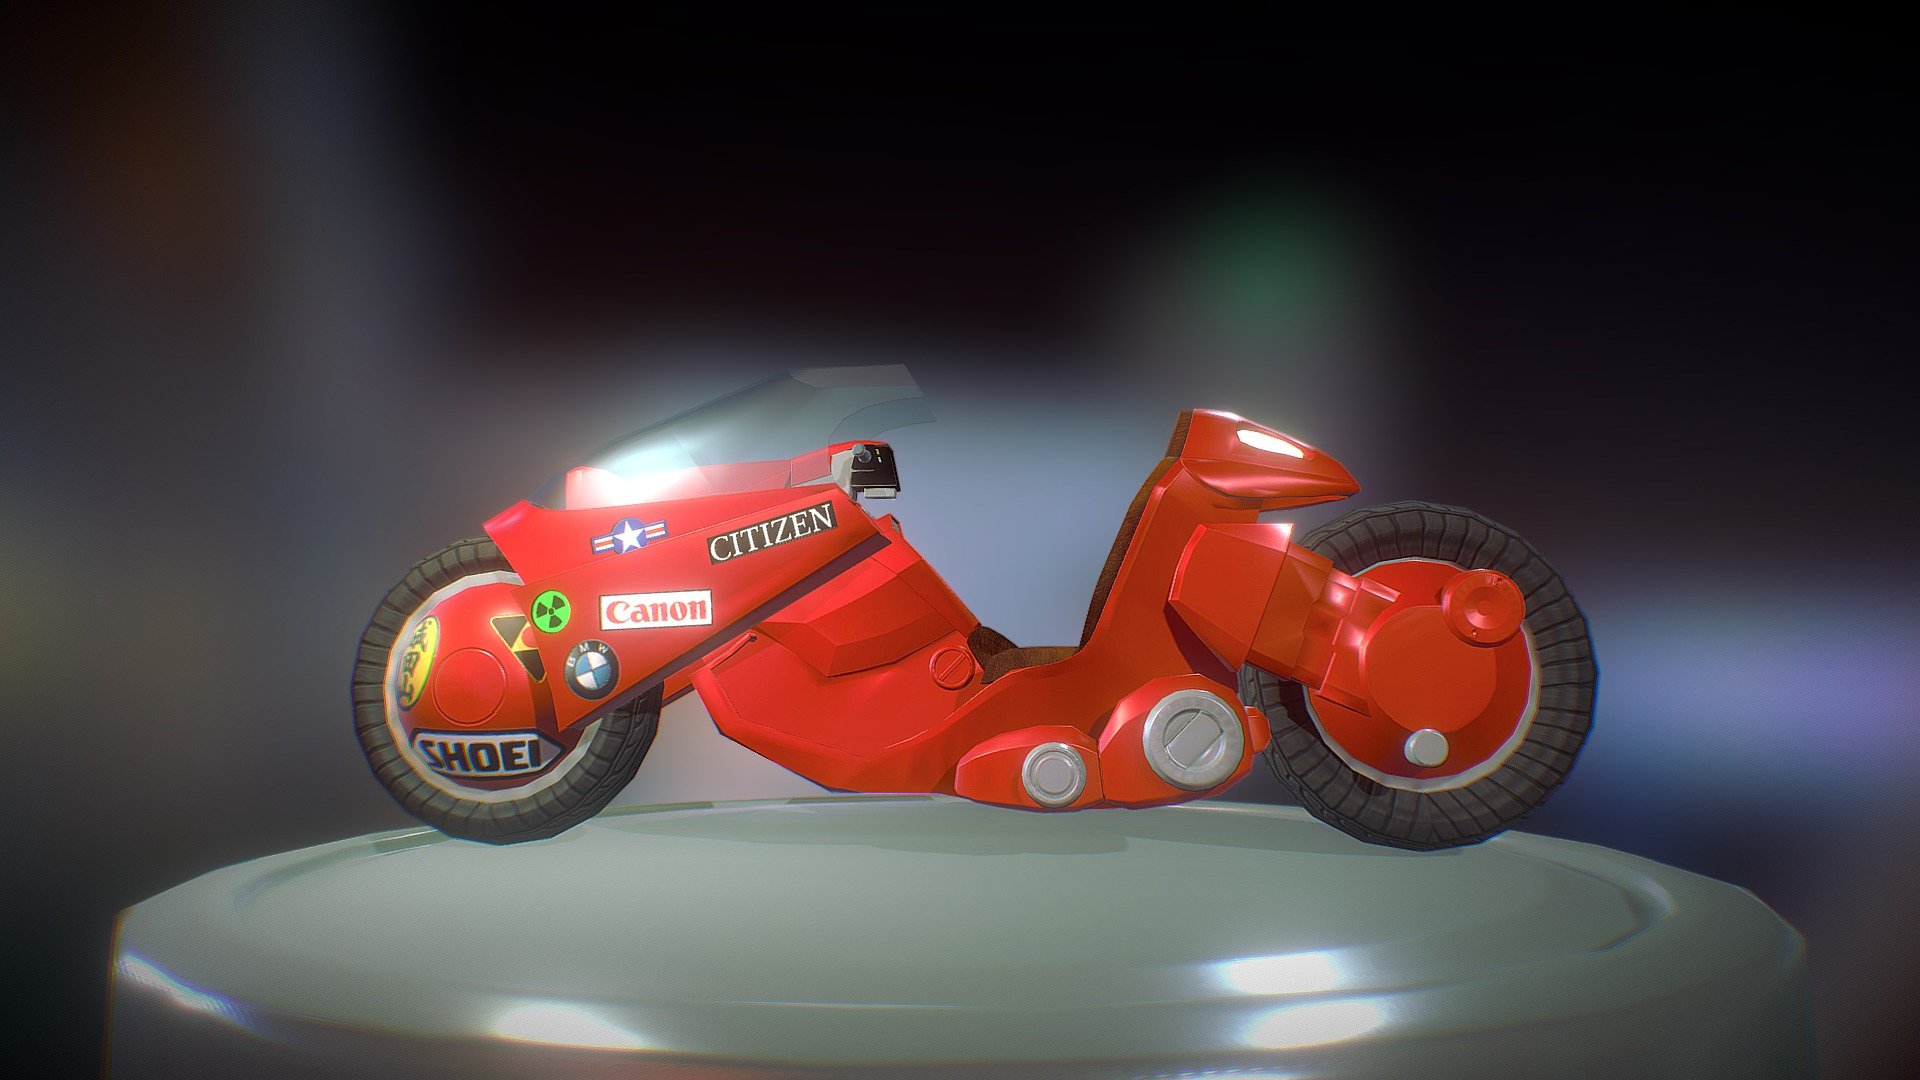 After the Kaneda model, here is his iconic bike.. Soon will post a model with Kaneda on the bike and with his weapon. Hope you enjoy!
Cheers - Kaneda's Bike - Buy Royalty Free 3D model by rpinto3d 3d model